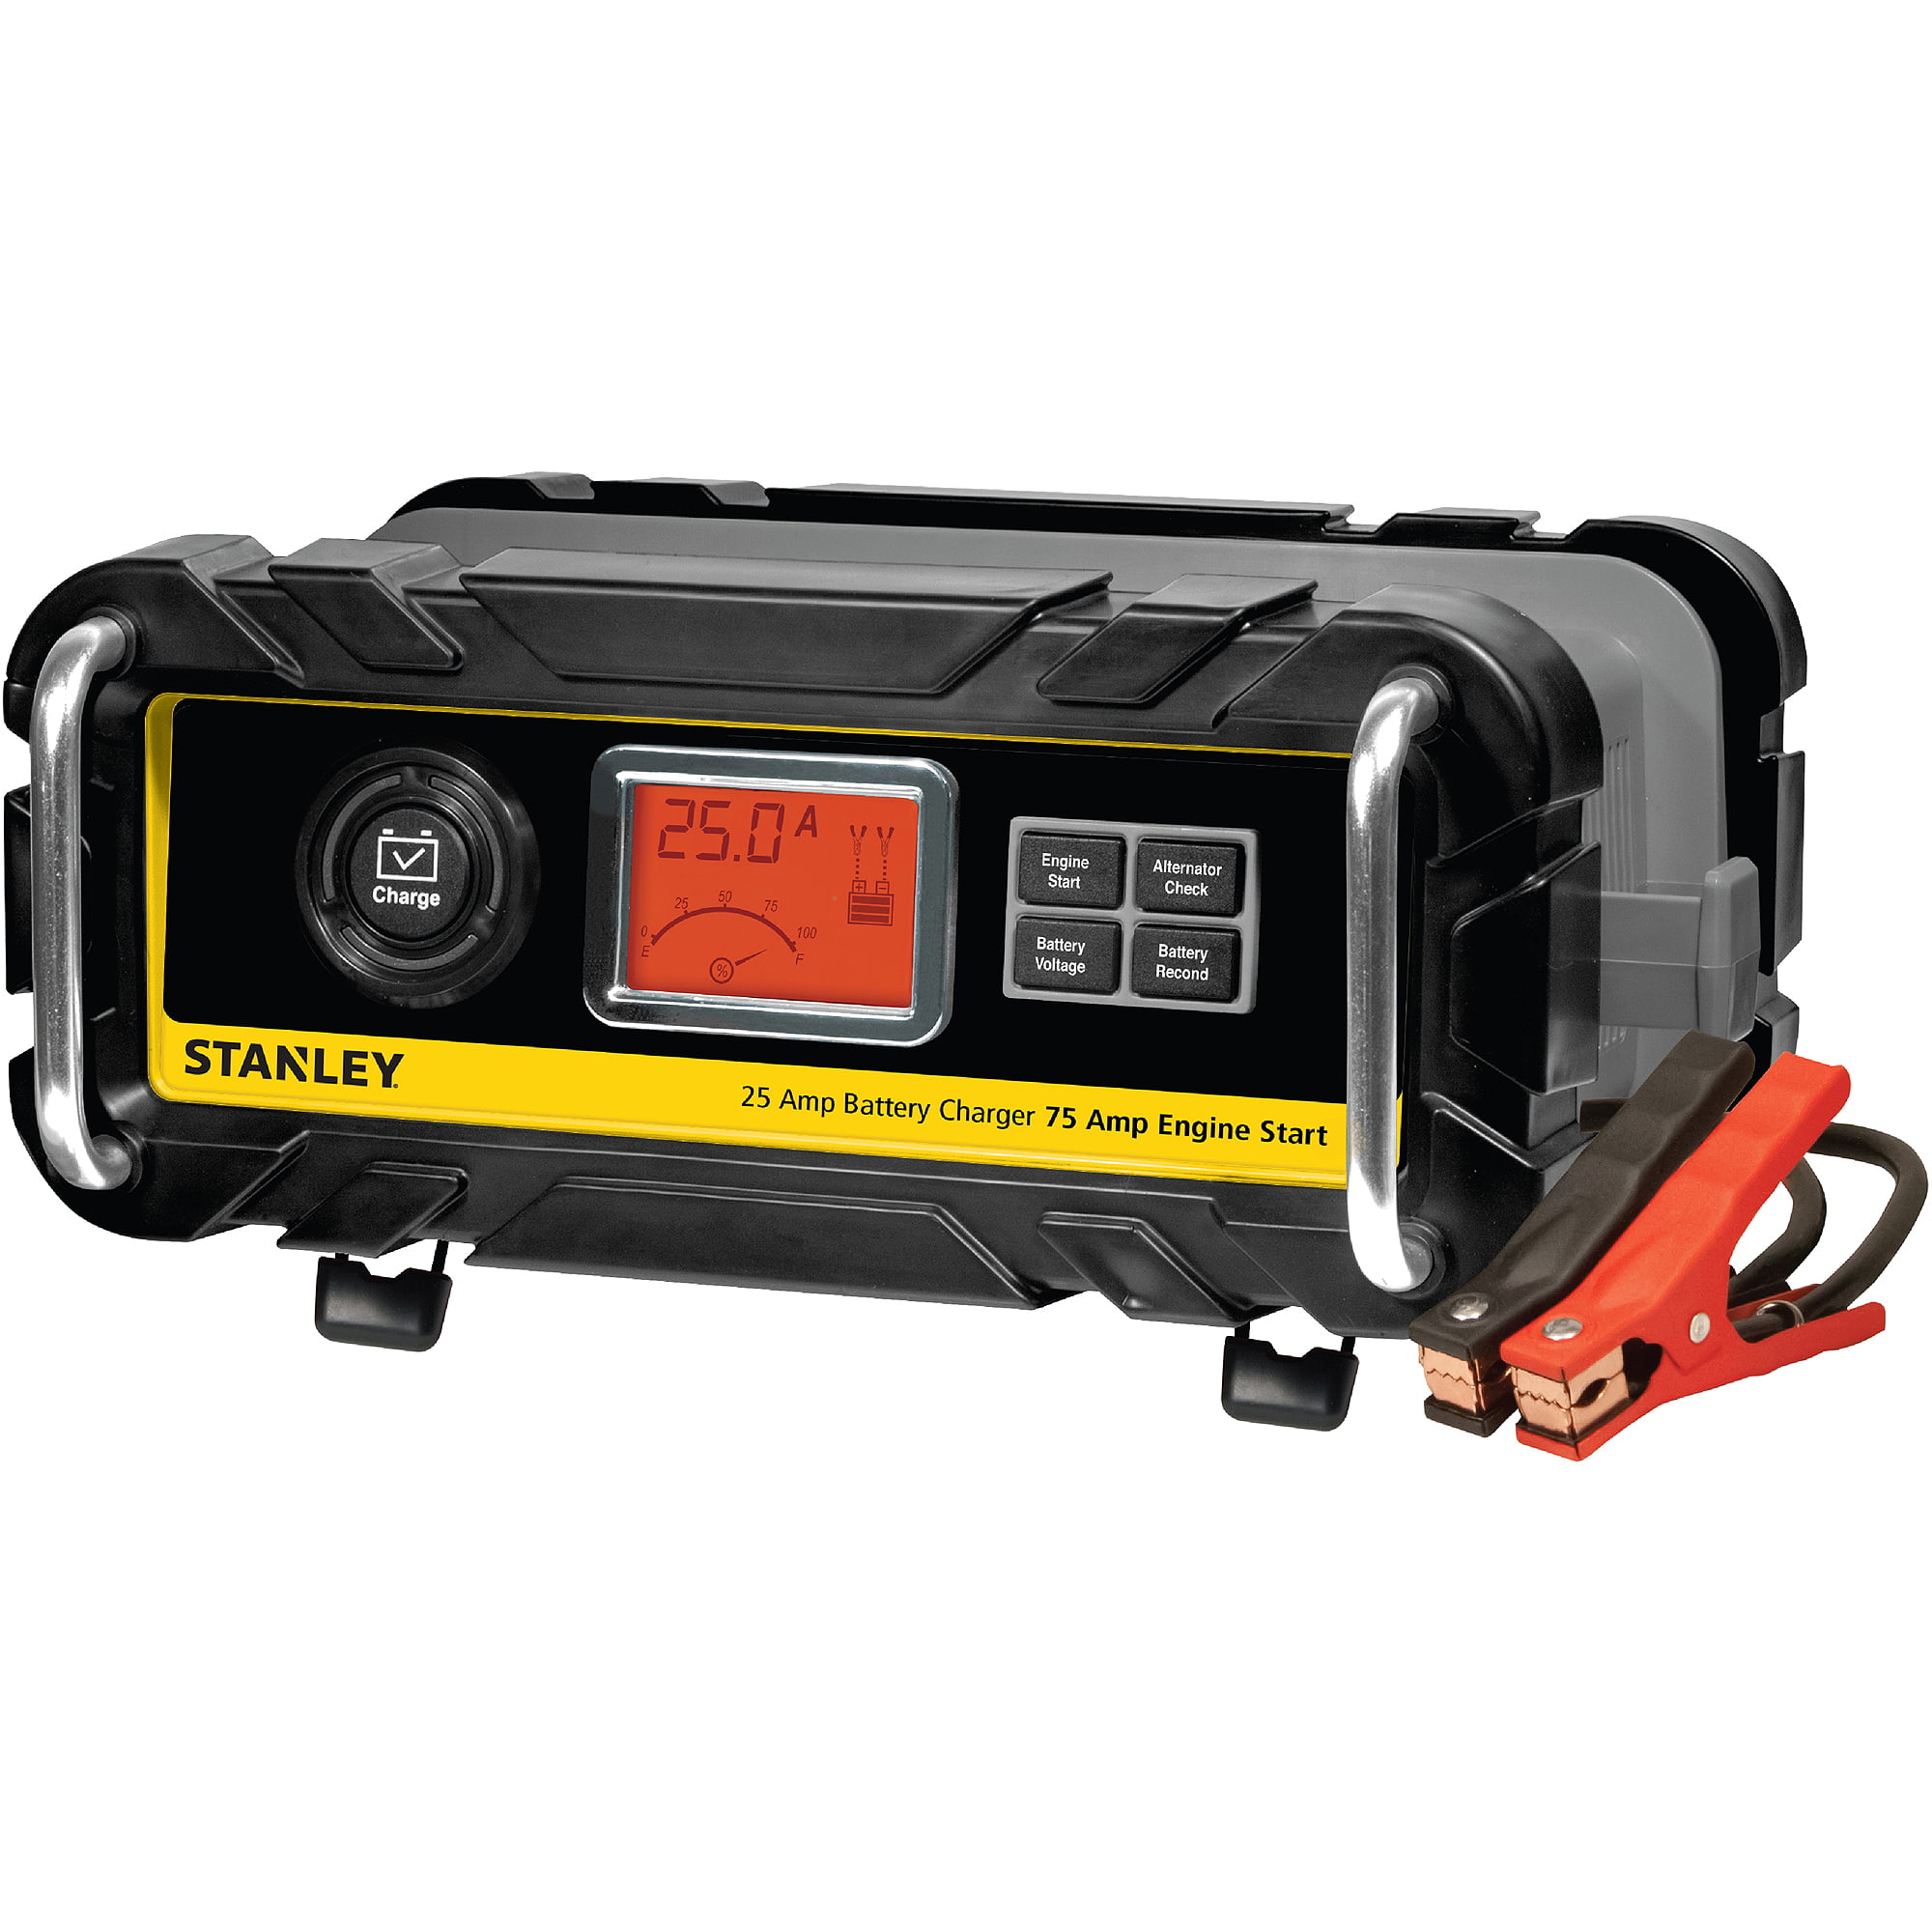 Stanley 25A Battery Charger with 75A Engine Start ...